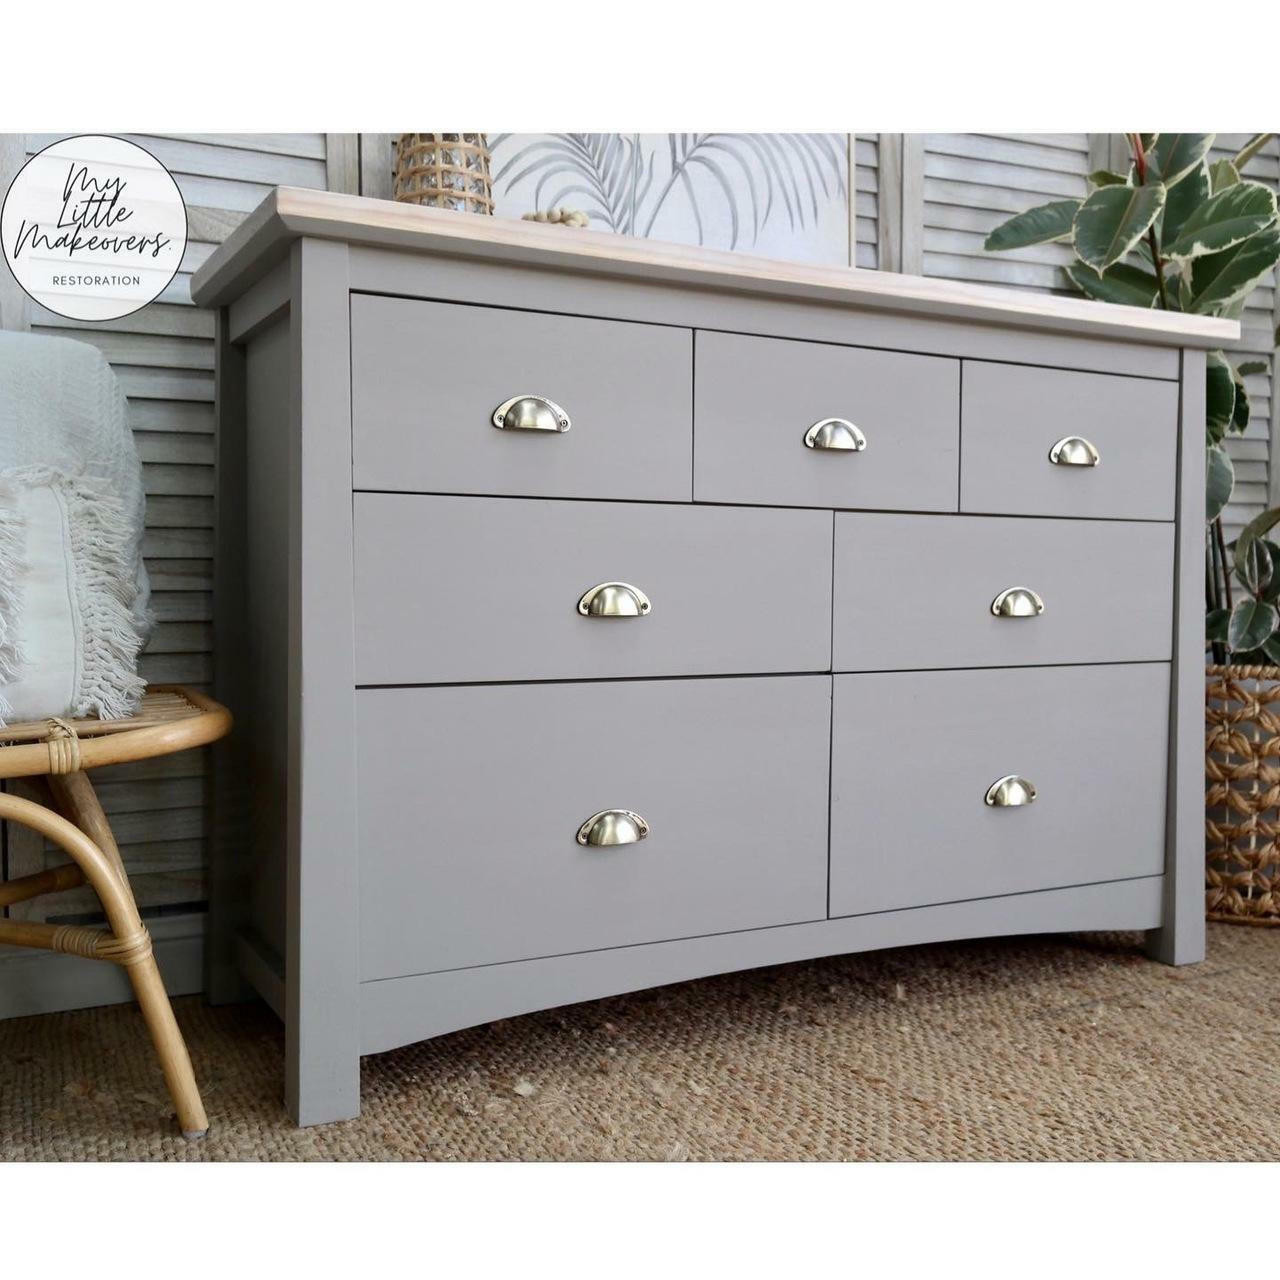 Dixie Belle Paint Company on X: This dresser was painted with